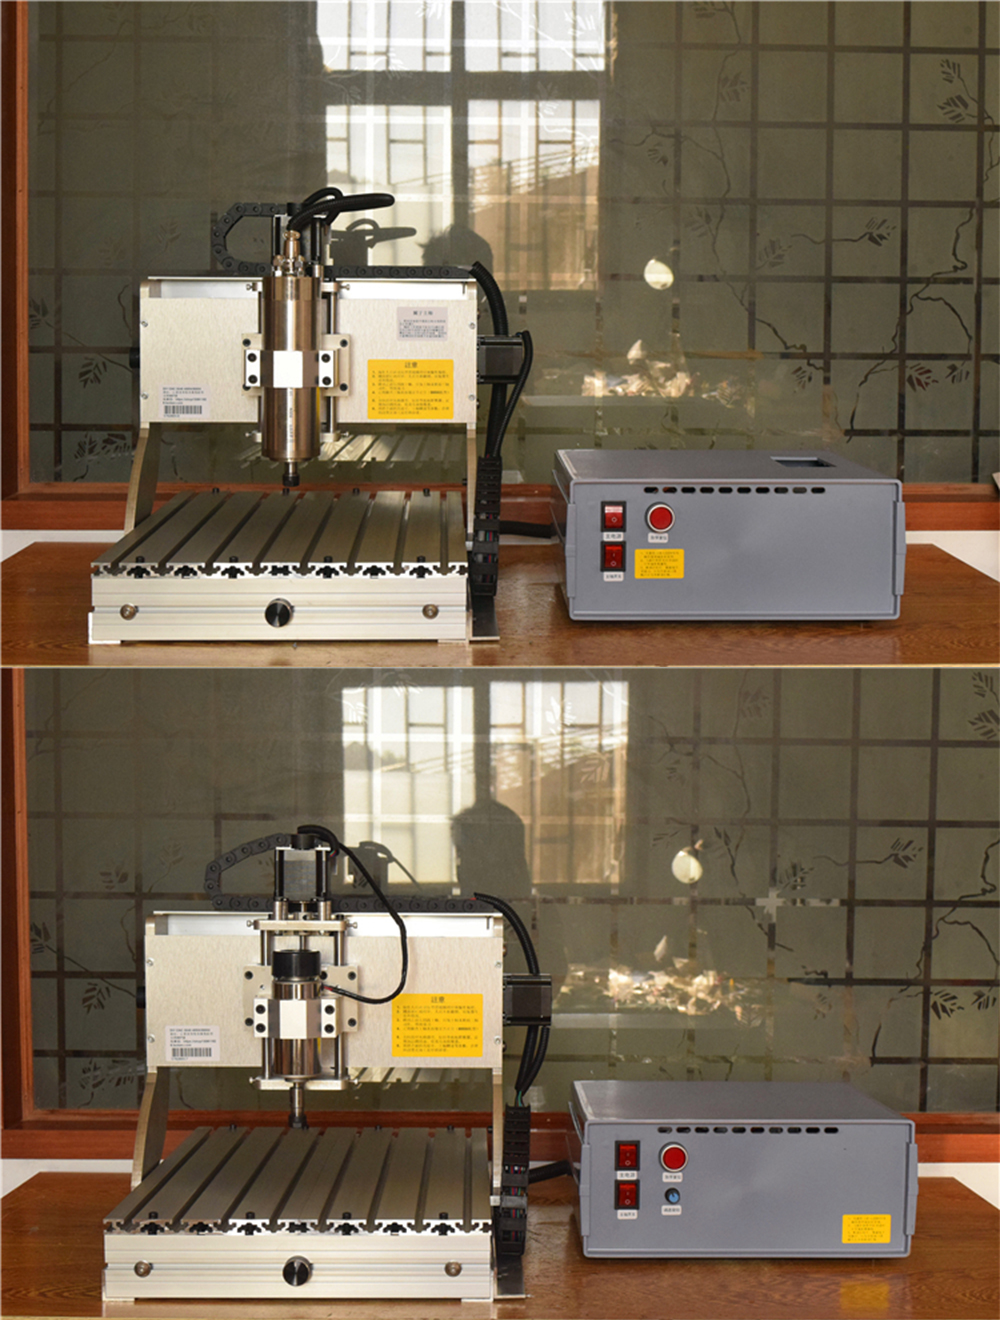 CNC 3040 400W/800W Spindle 3 Axis CNC Router Engraving PCB Milling Cutting DRILLING Machine 220V